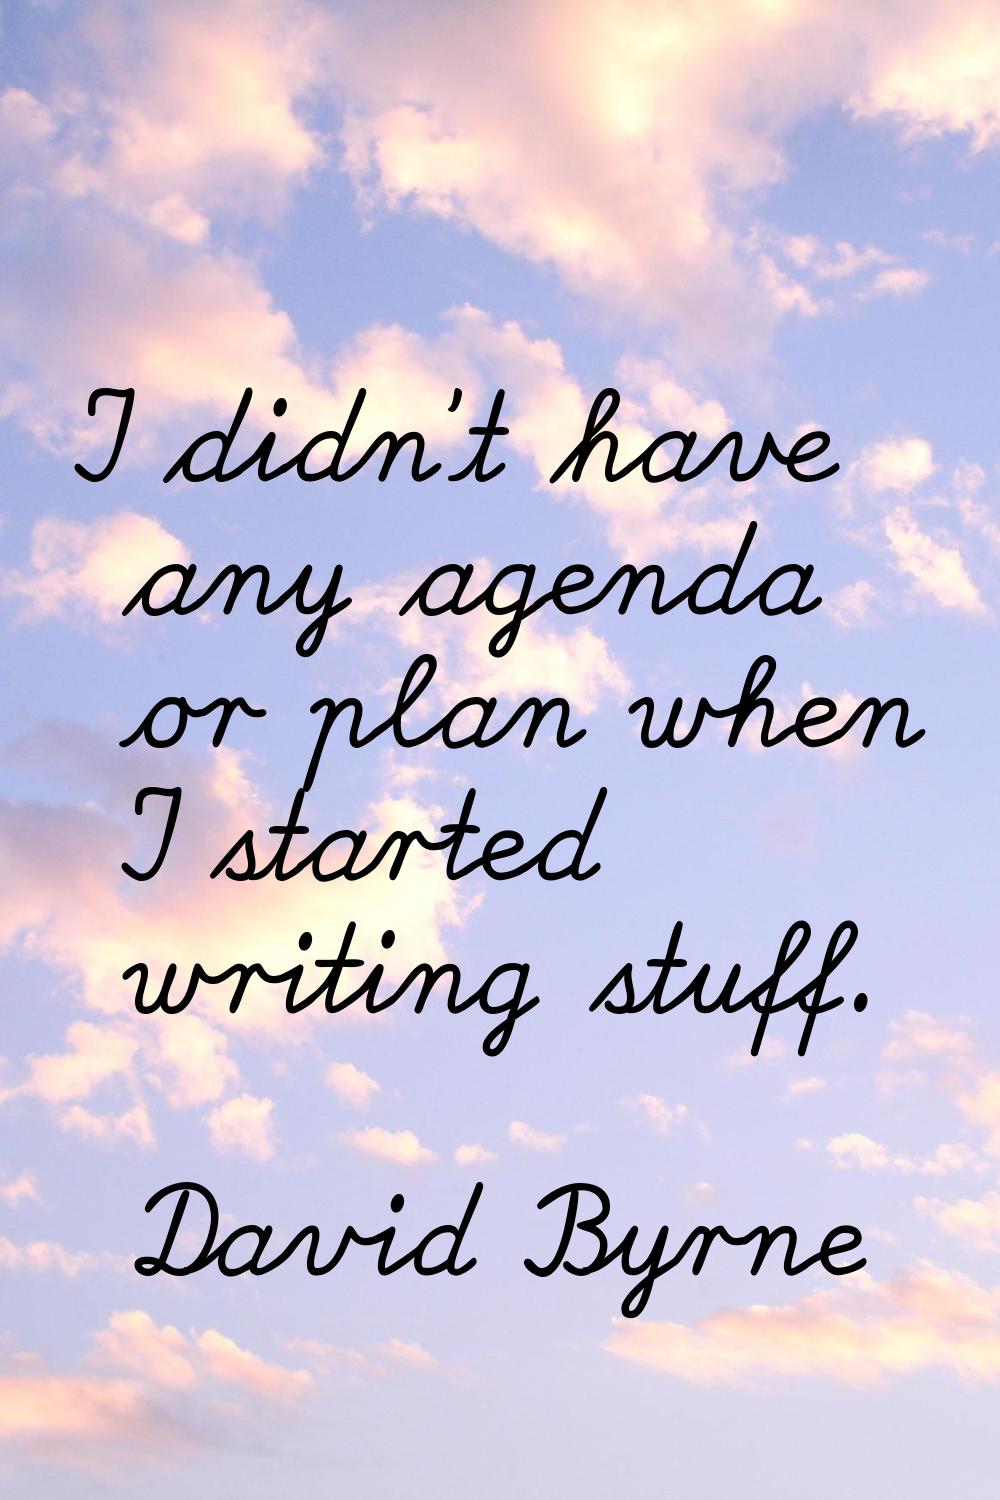 I didn't have any agenda or plan when I started writing stuff.